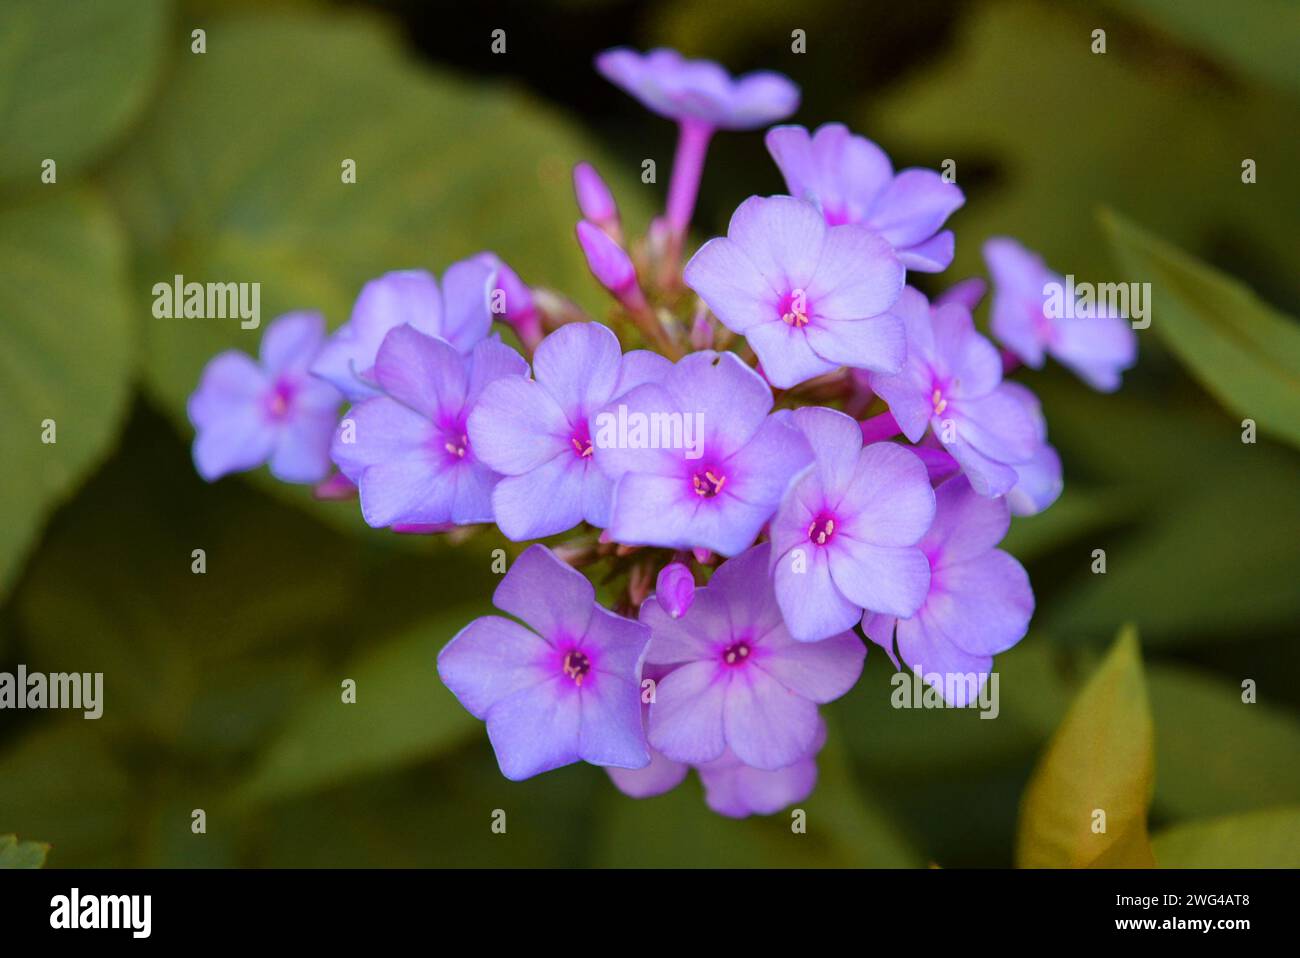 Art photo of beautiful and diverse phlox flowers in interesting colors and an unusual palette. Flowering flower buds flock that grow in the garden. Stock Photo